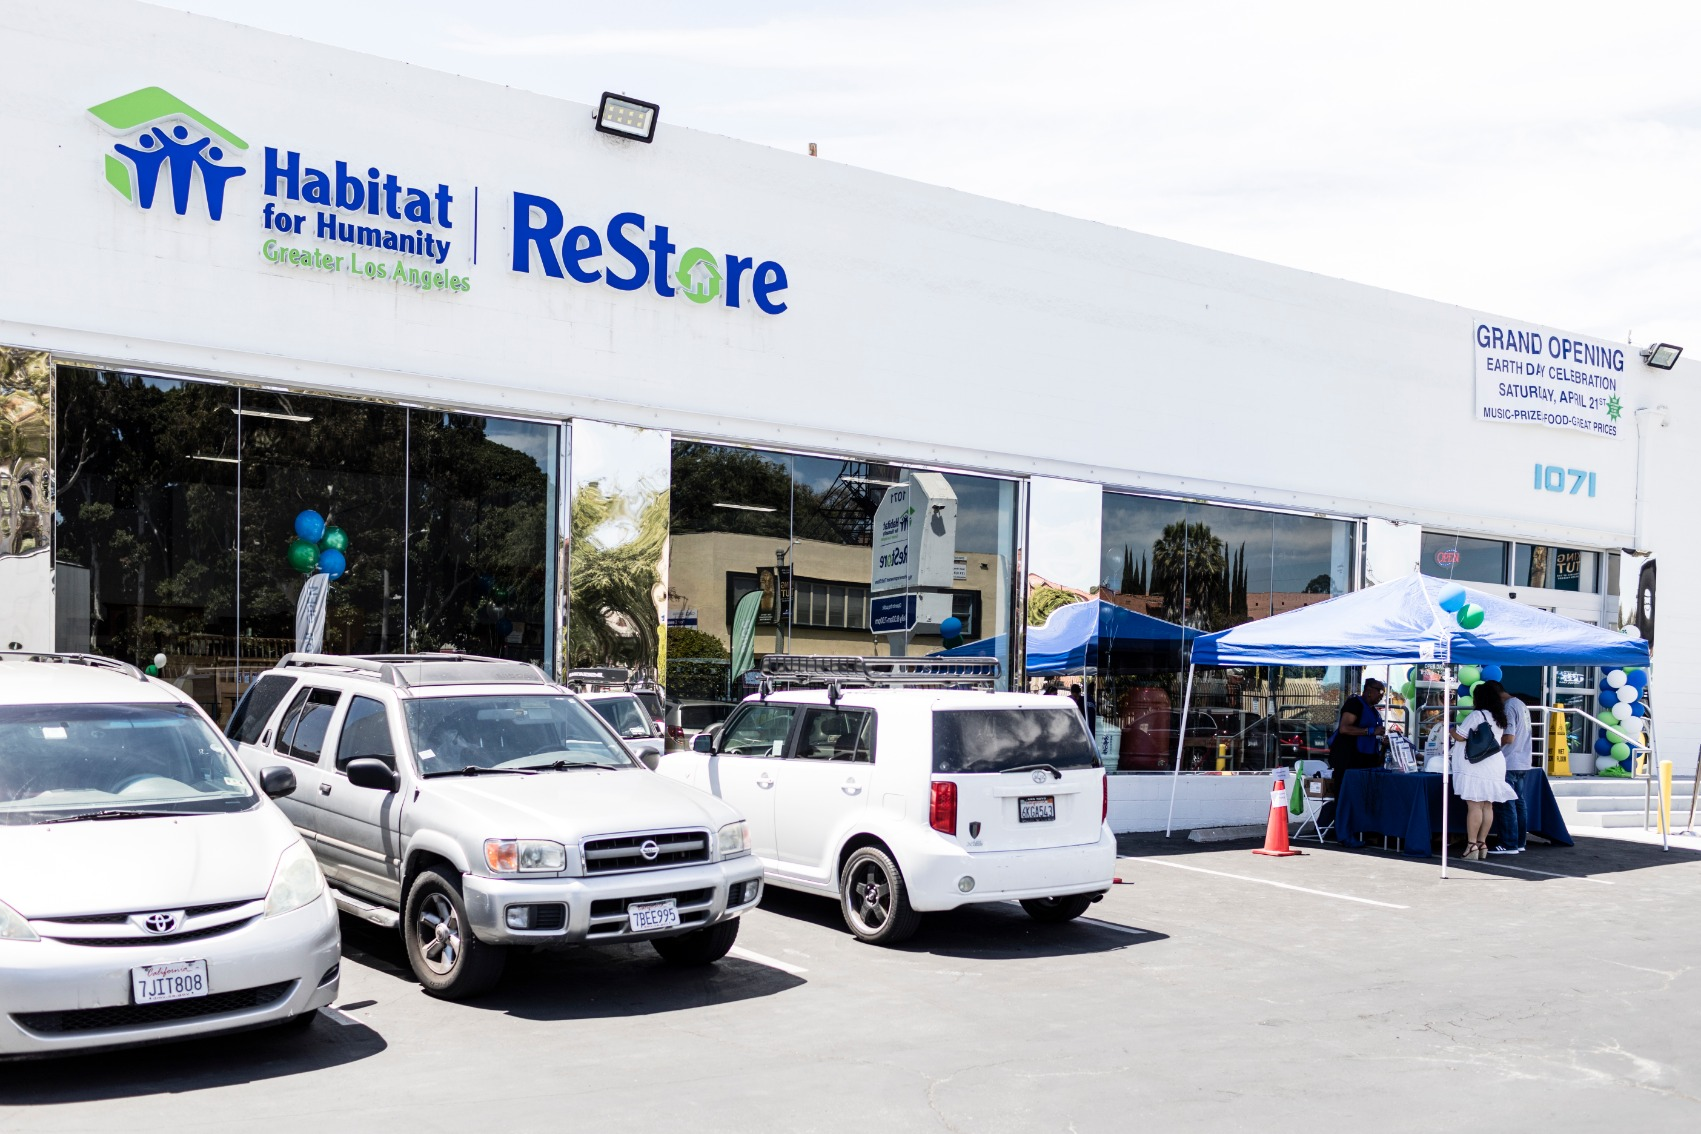 Habitat for Humanity of Greater Los Angeles ReStore